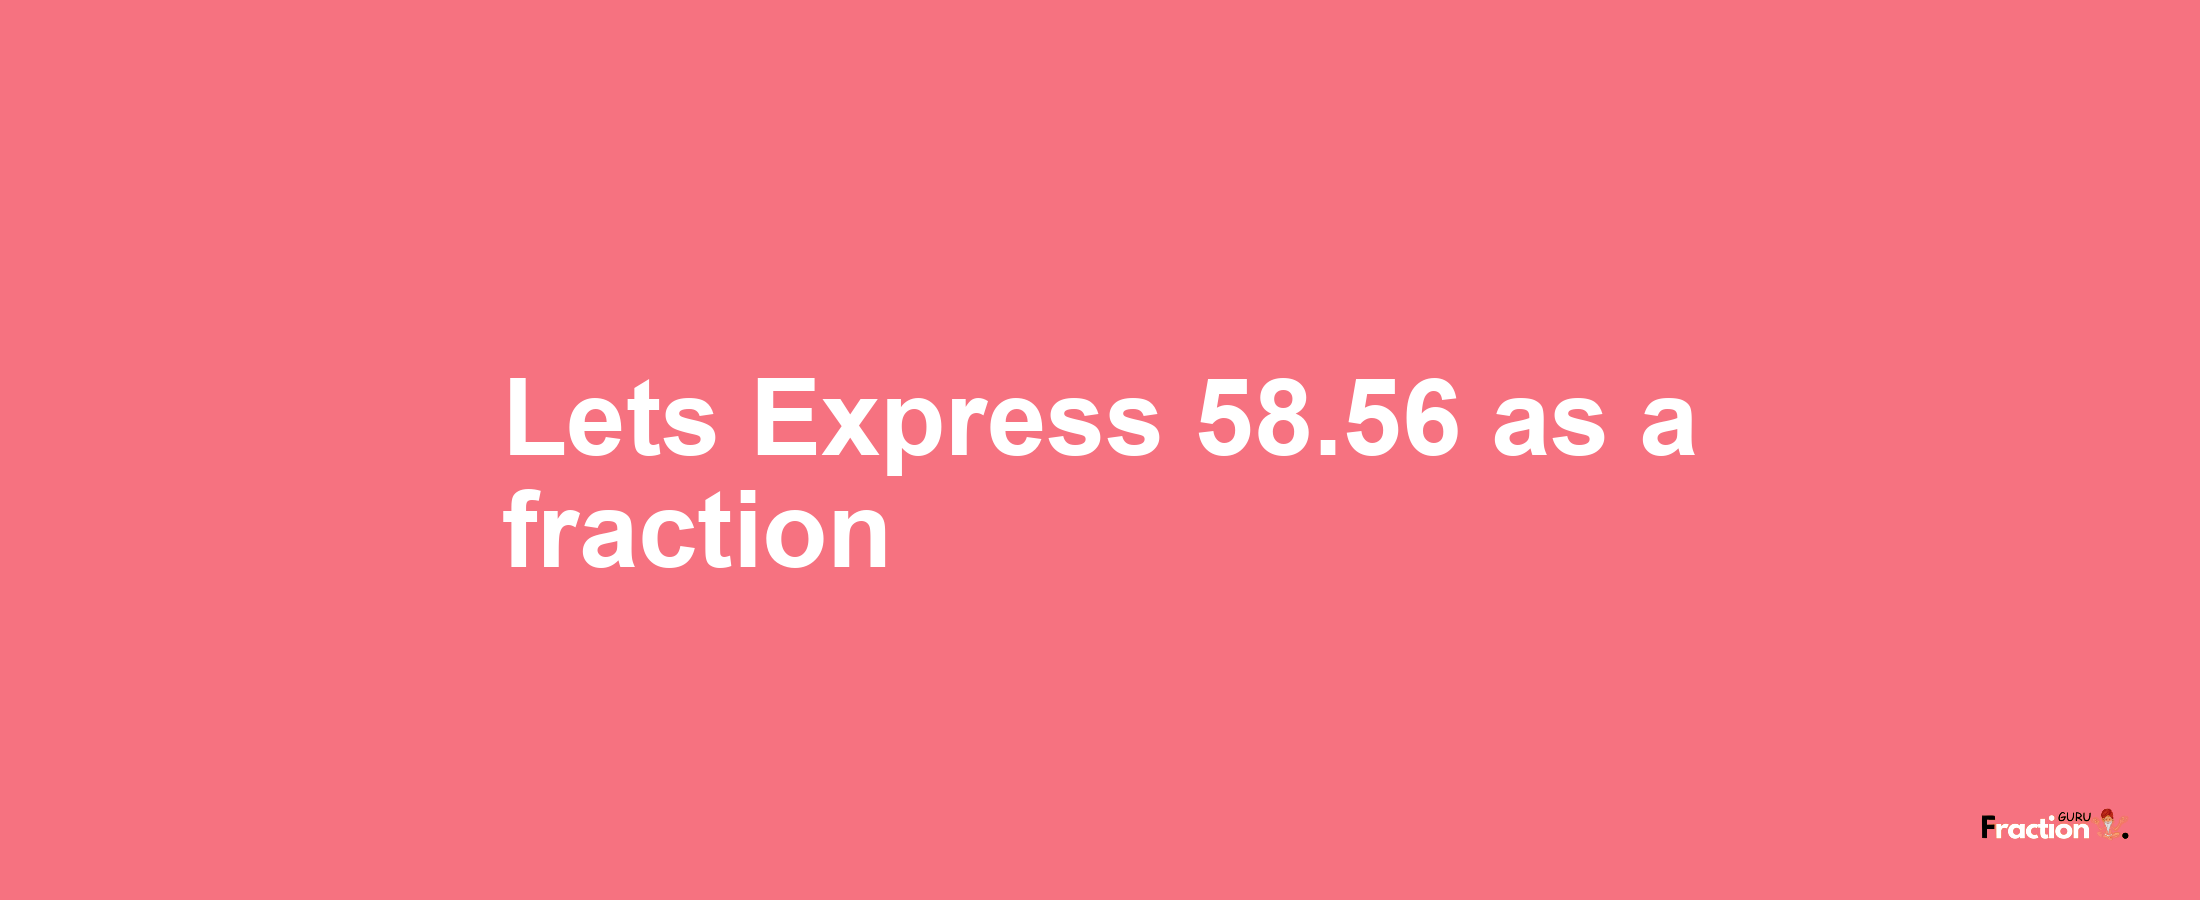 Lets Express 58.56 as afraction